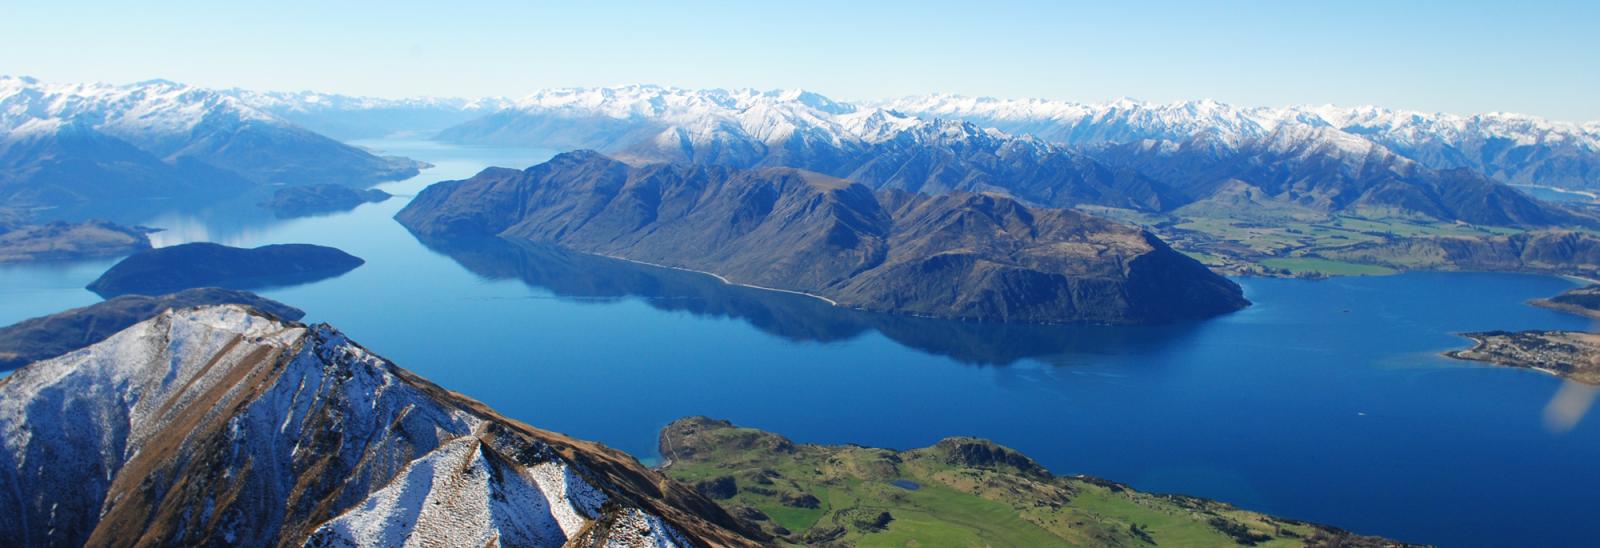 Breathtaking views of New Zealand's South Island.